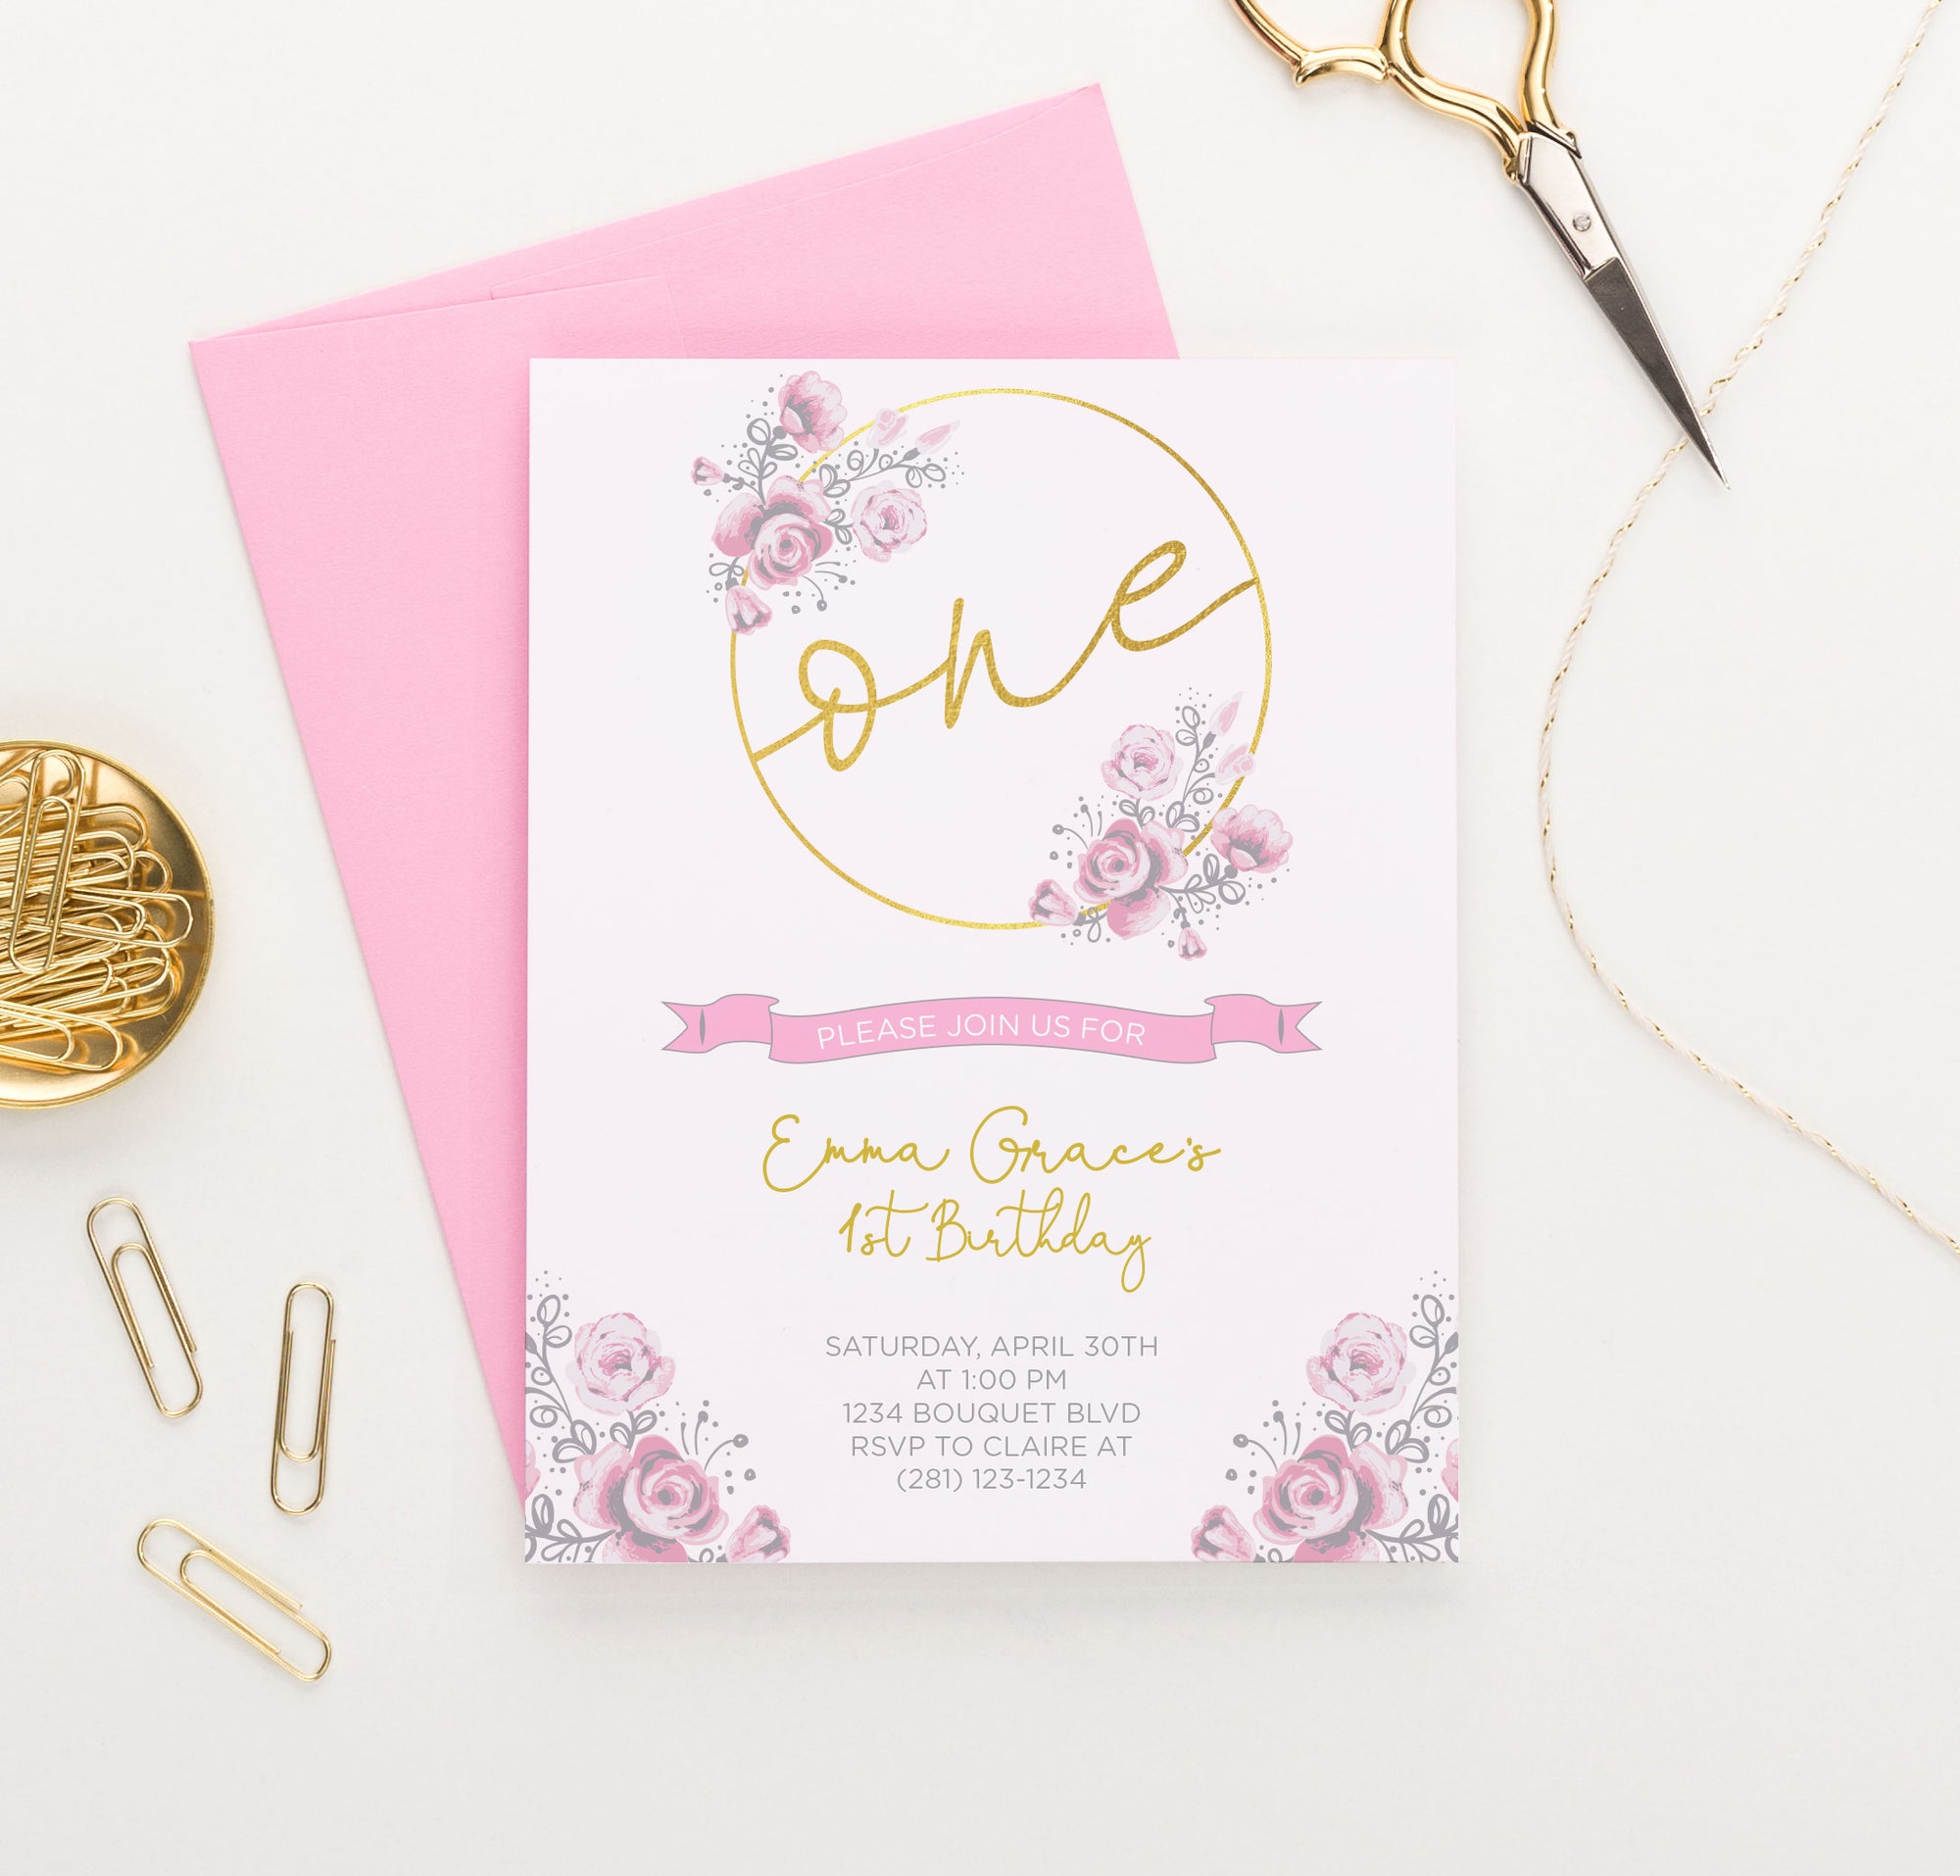 Personalized Gold 1st Birthday Invitations With Soft Pink Florals